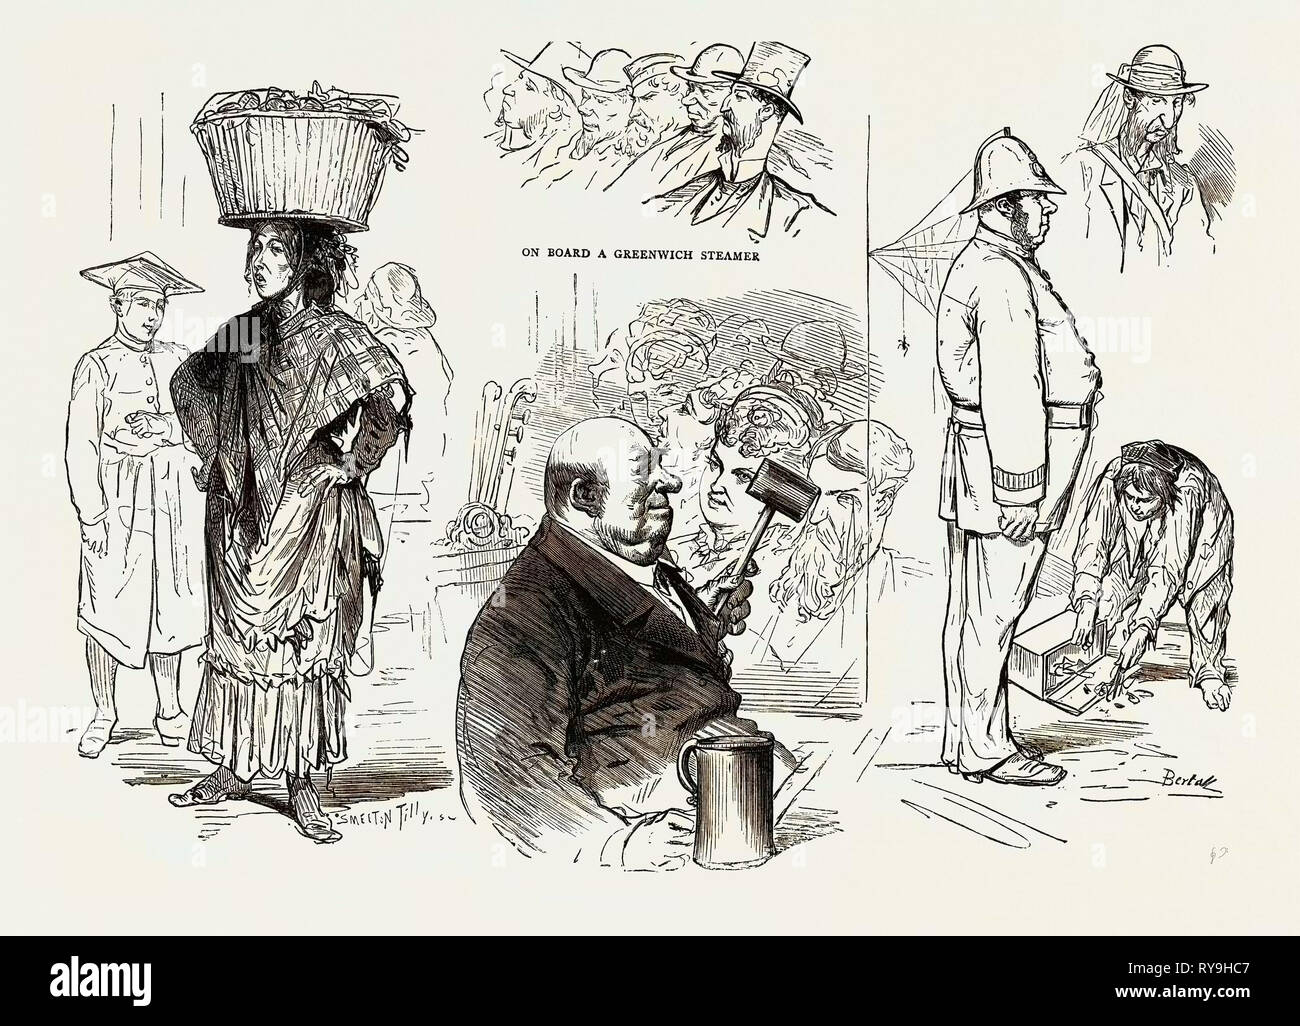 Pictures of London by a French Artist: Chairman of a Musical Meeting -Ten Pints an Hour, the British Policeman - Calm and Steady at His Post, a Street Fruit Seller, on Board a Greenwich Steamer, a Bona Fide Traveller Stock Photo